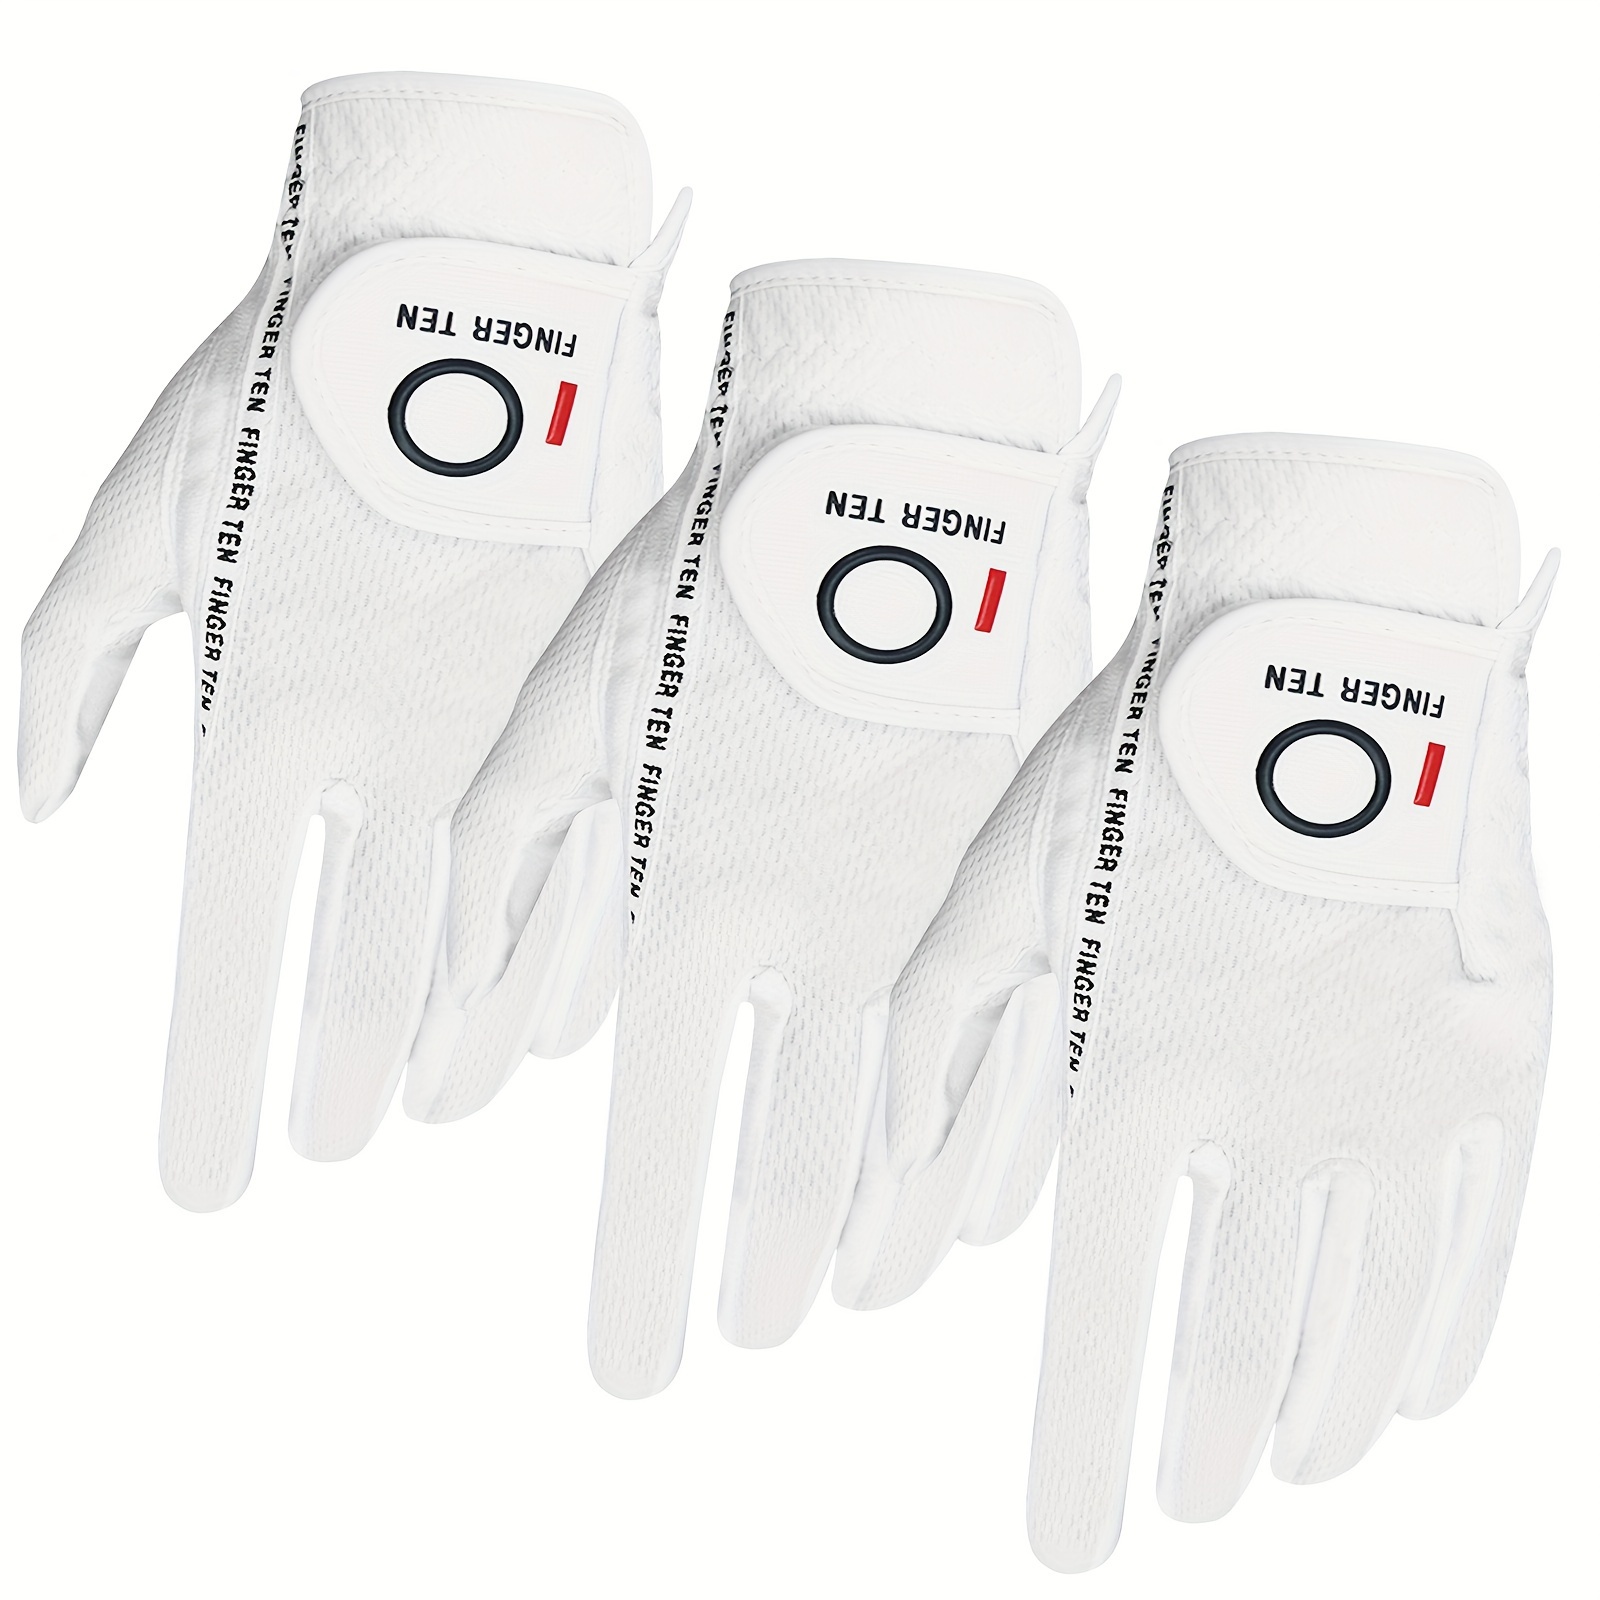 3 pack mens golf gloves for right left handed golfer all weather performance s m l xl xxl 1